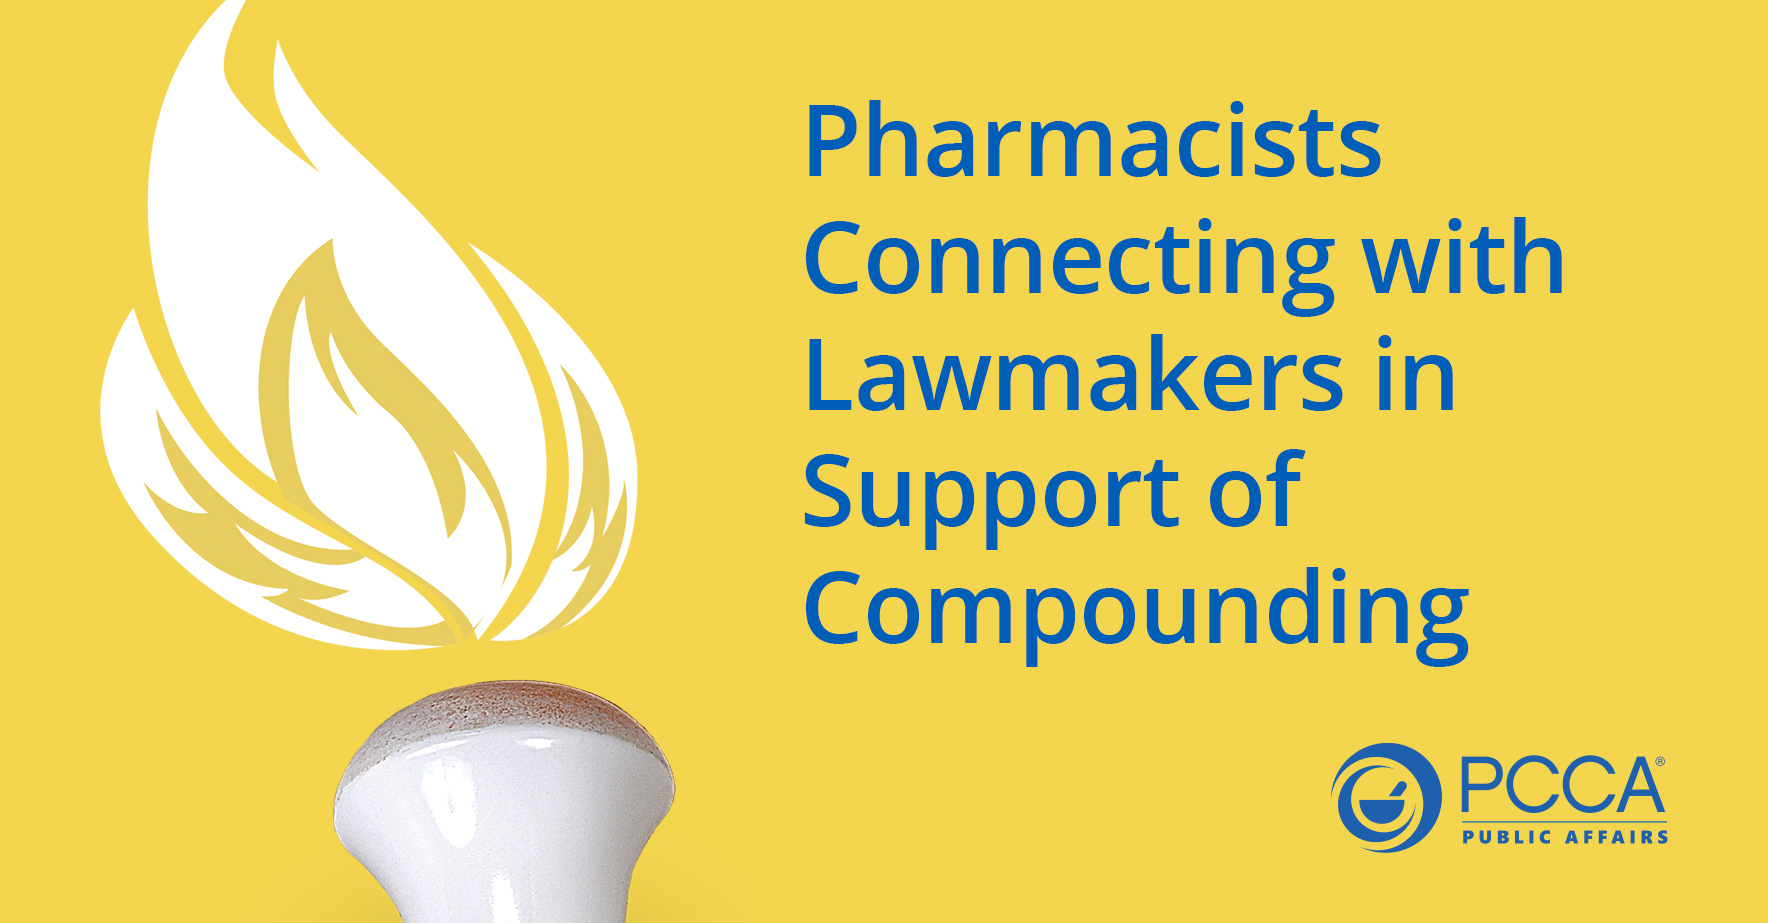 Pharmacists_Connecting_with_Lawmakers_in_Support_of_Compounding.jpg